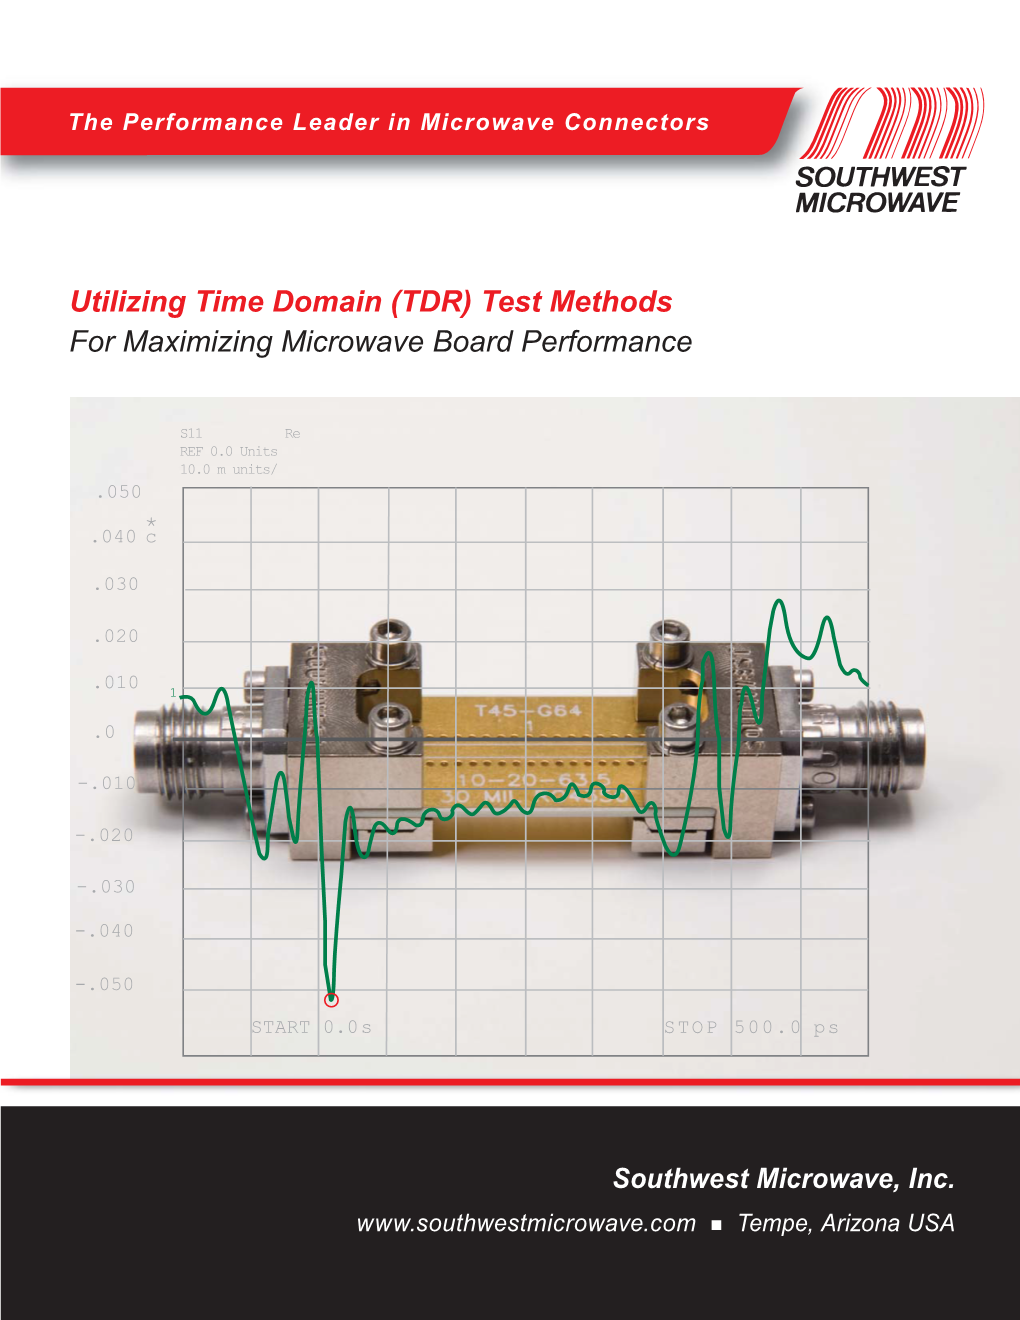 Utilizing Time Domain (TDR) Test Methods for Maximizing Microwave Board Performance